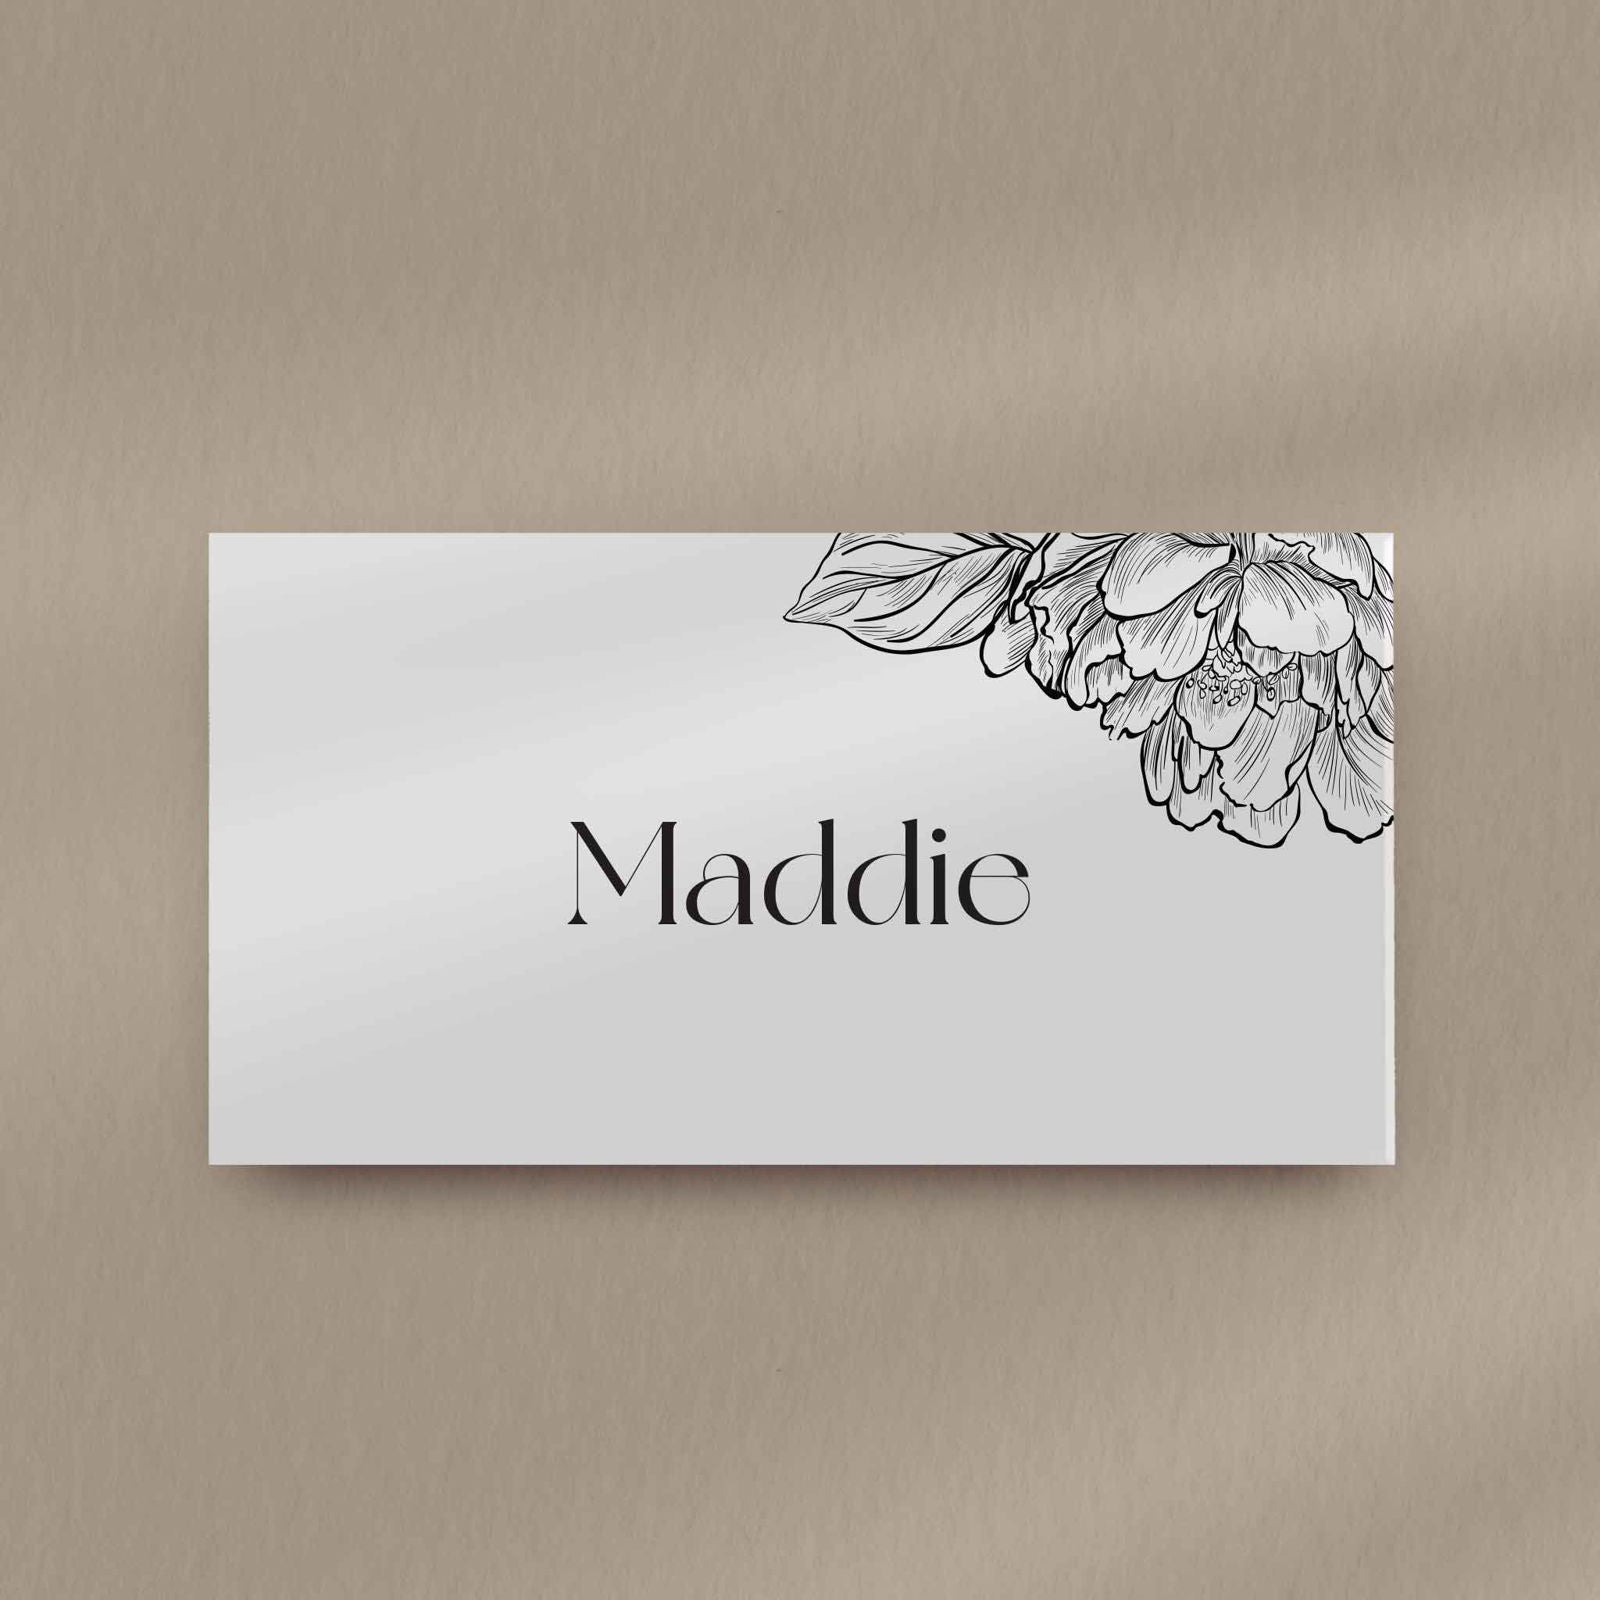 Maddie Place Card  Ivy and Gold Wedding Stationery   